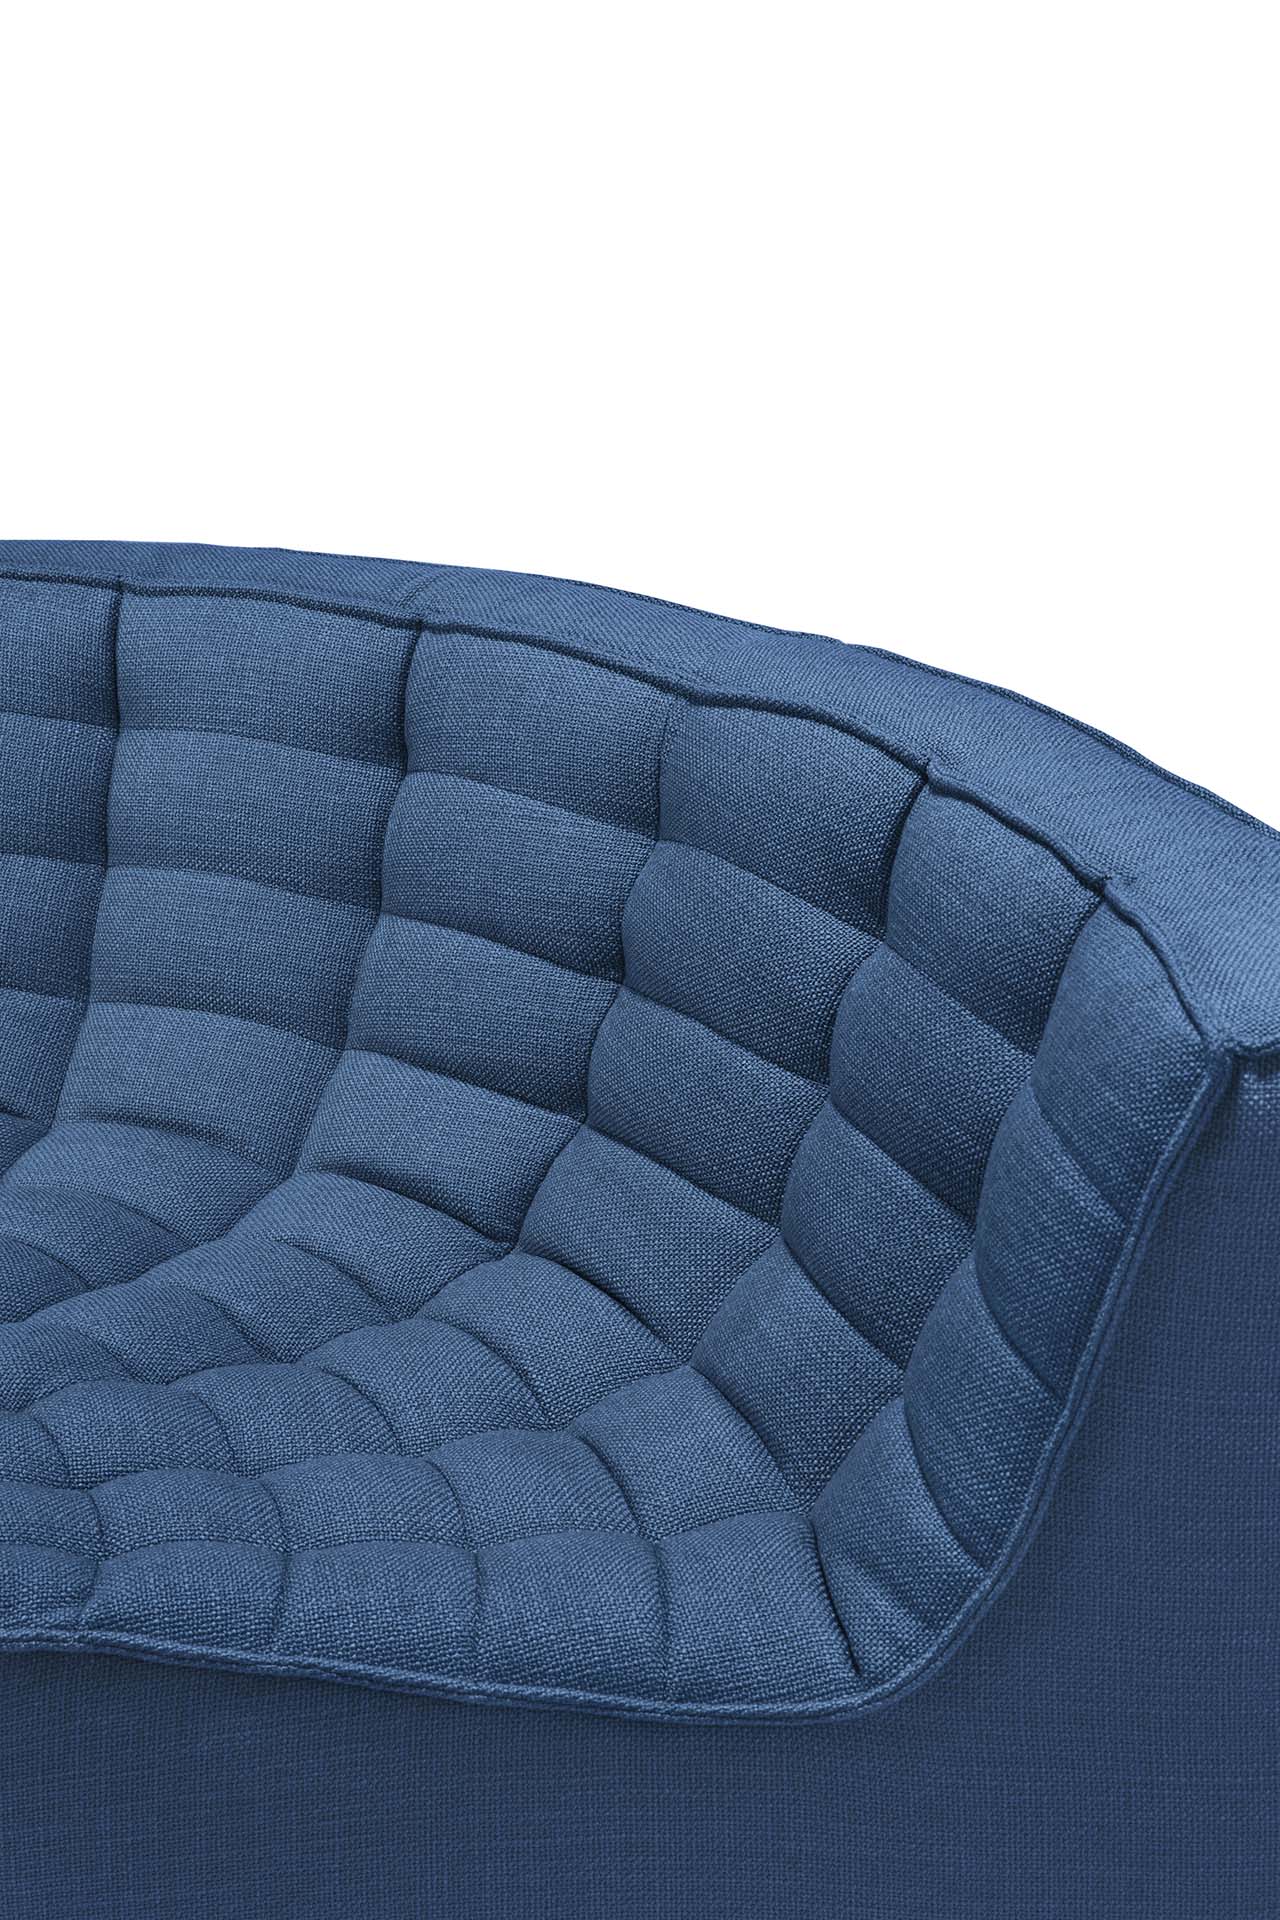 N701 Ethnicraft Slouch Sofa in Navy Blue fabric available from Make Your House A Home, Bendigo, Victoria, Australia